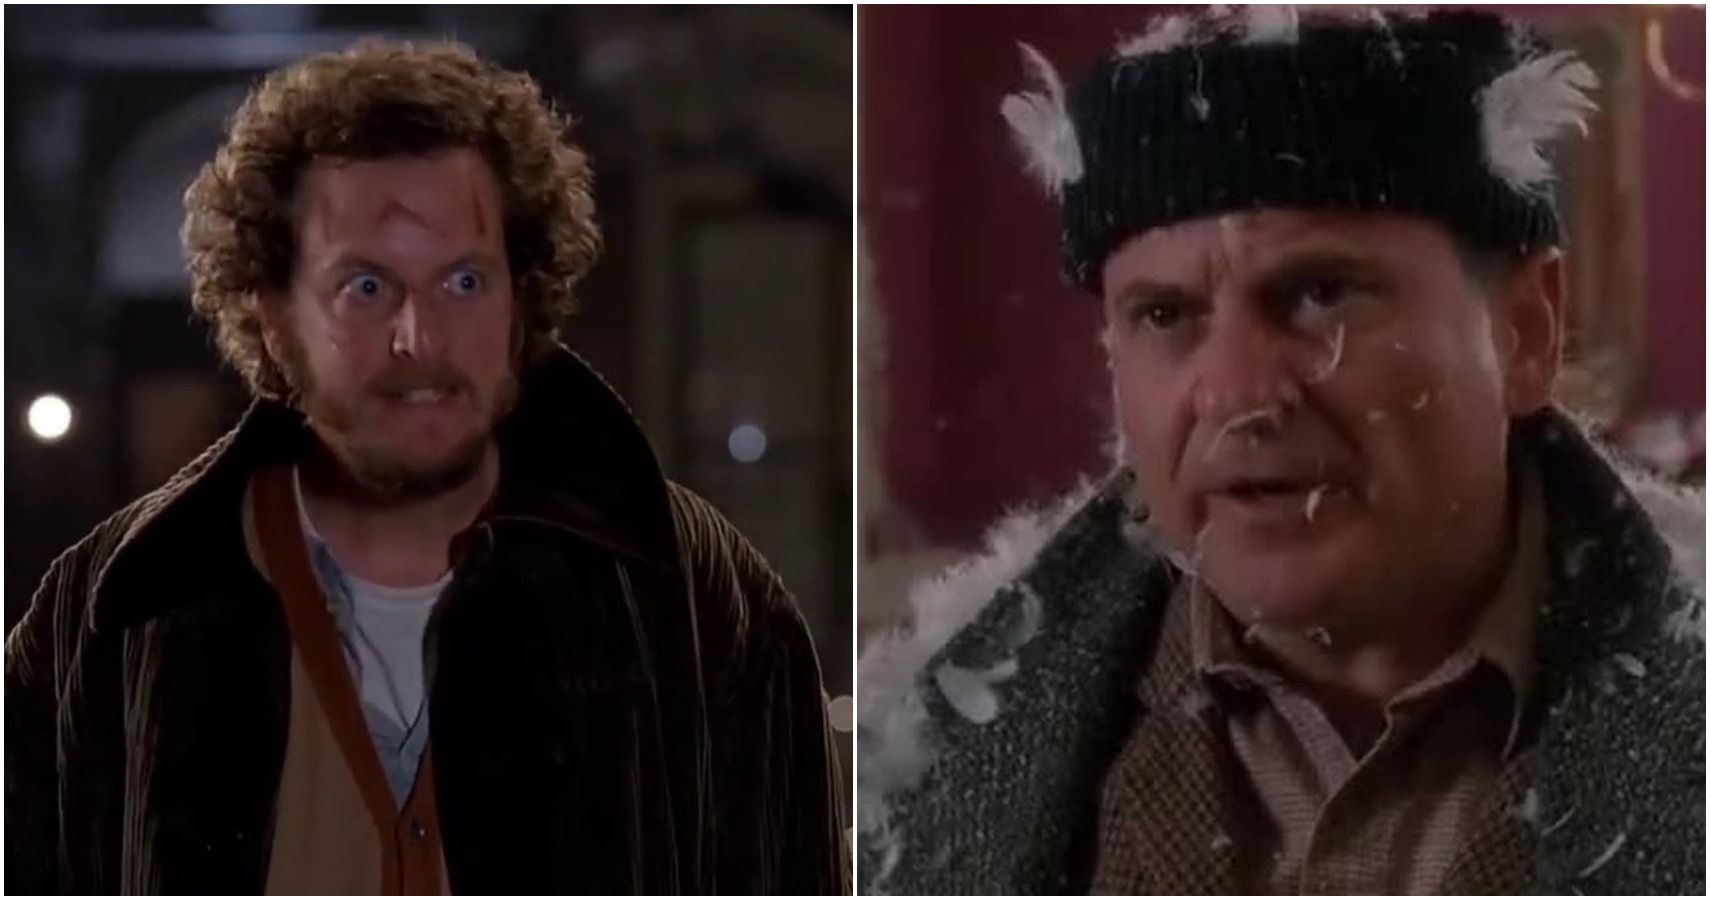 Marv on left and Harry on right from Home Alone split image